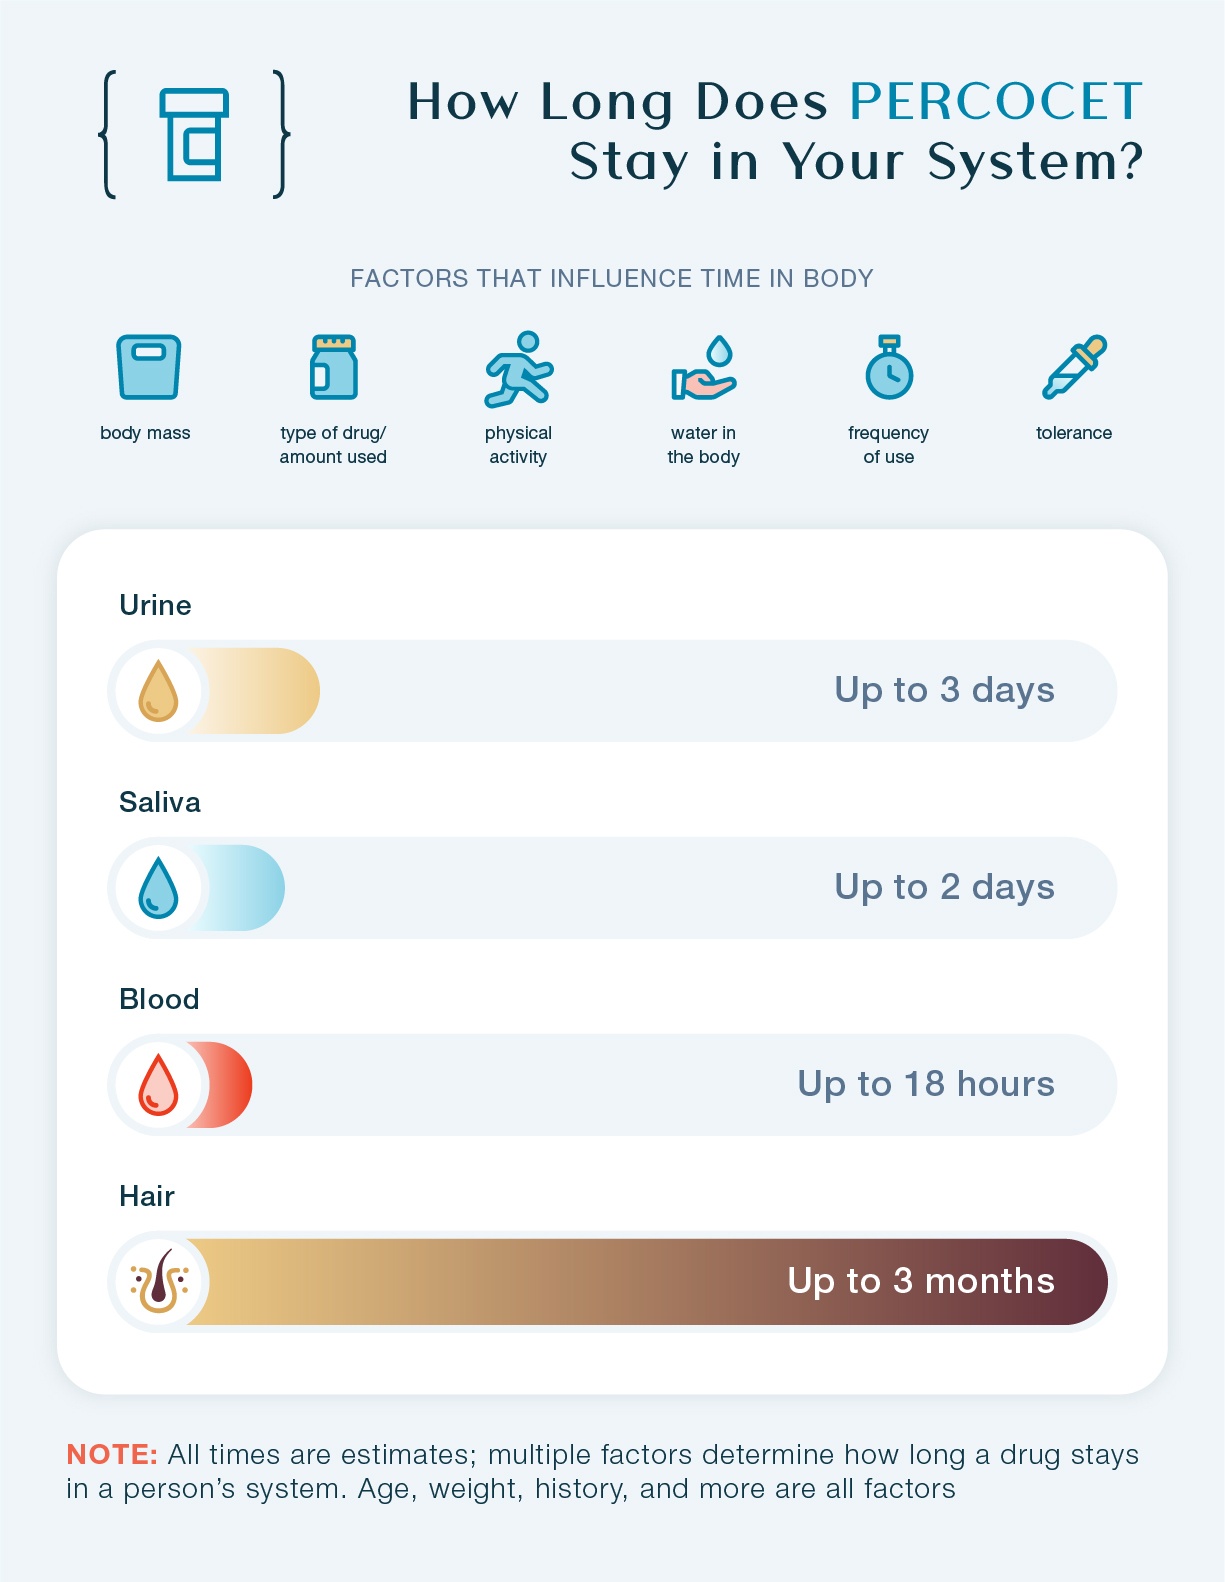 How long does Percocet stay in your system? This chart shows how long Perks stays in urine, saliva, blood, and hair